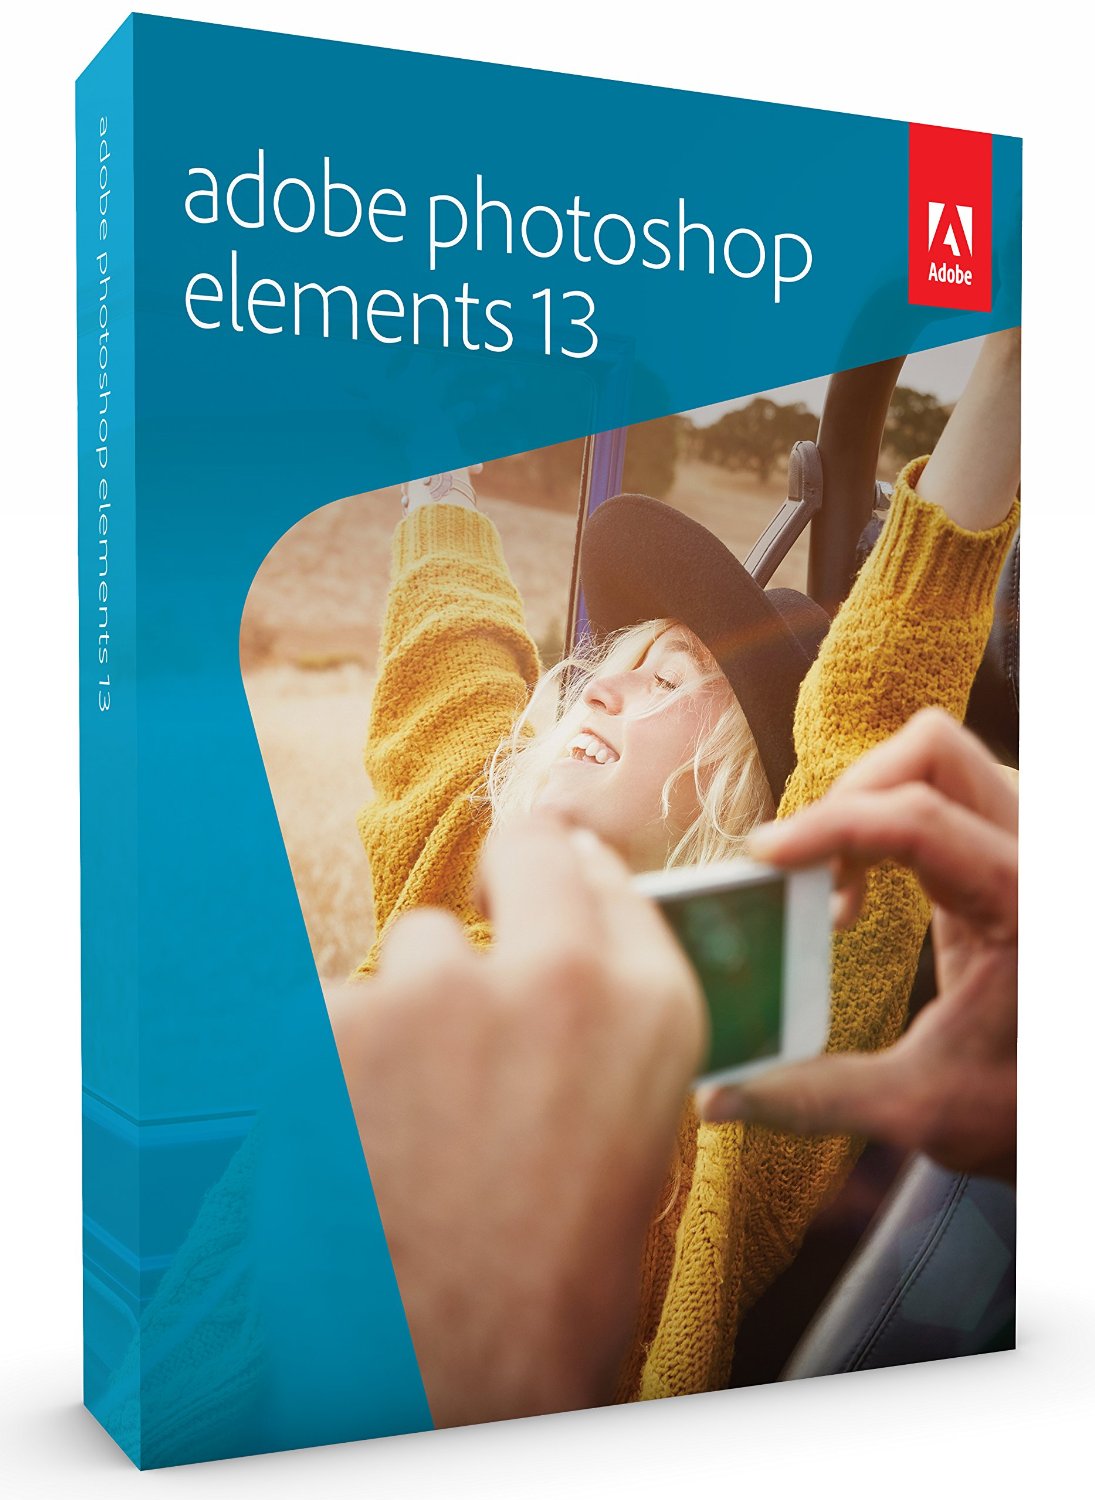 Adobe Photoshop Elements 13 is 55% Off Today [Deal]